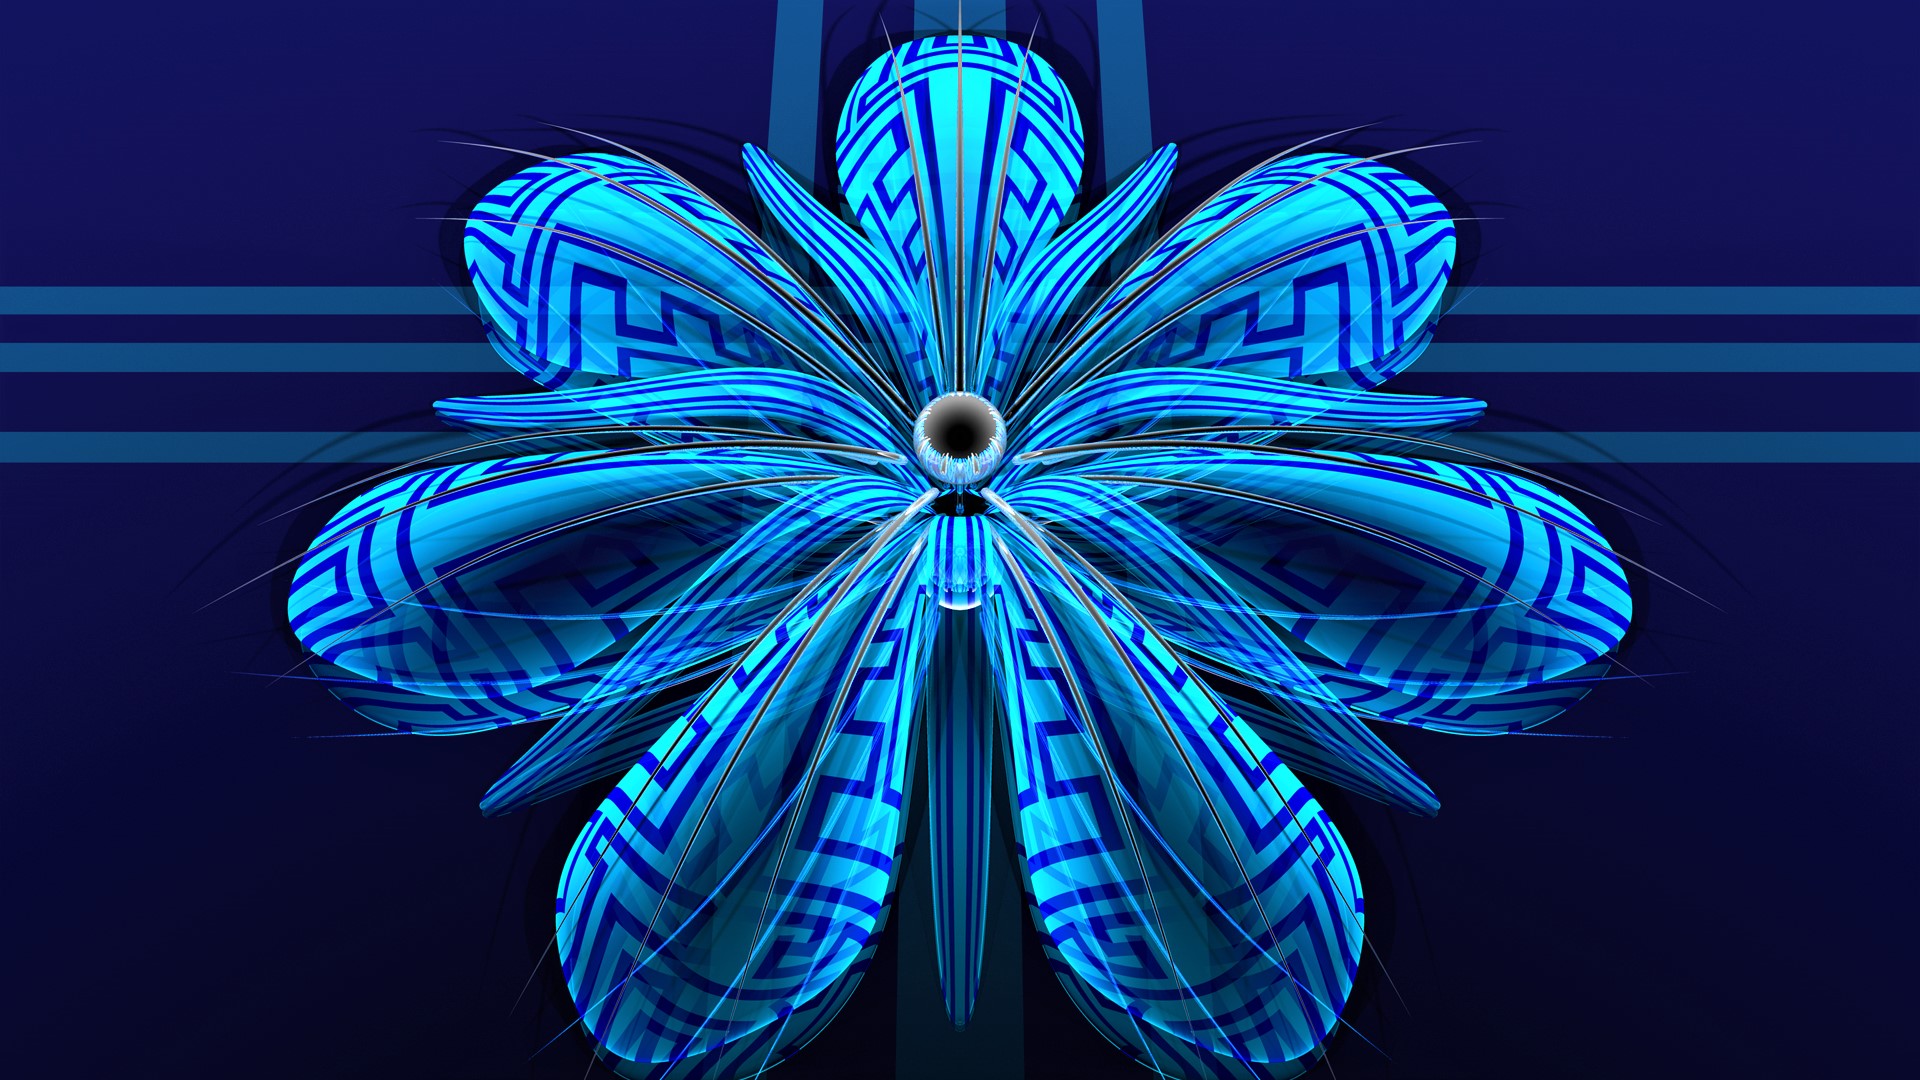 Abstract Blue Flower Pattern 1920x1080